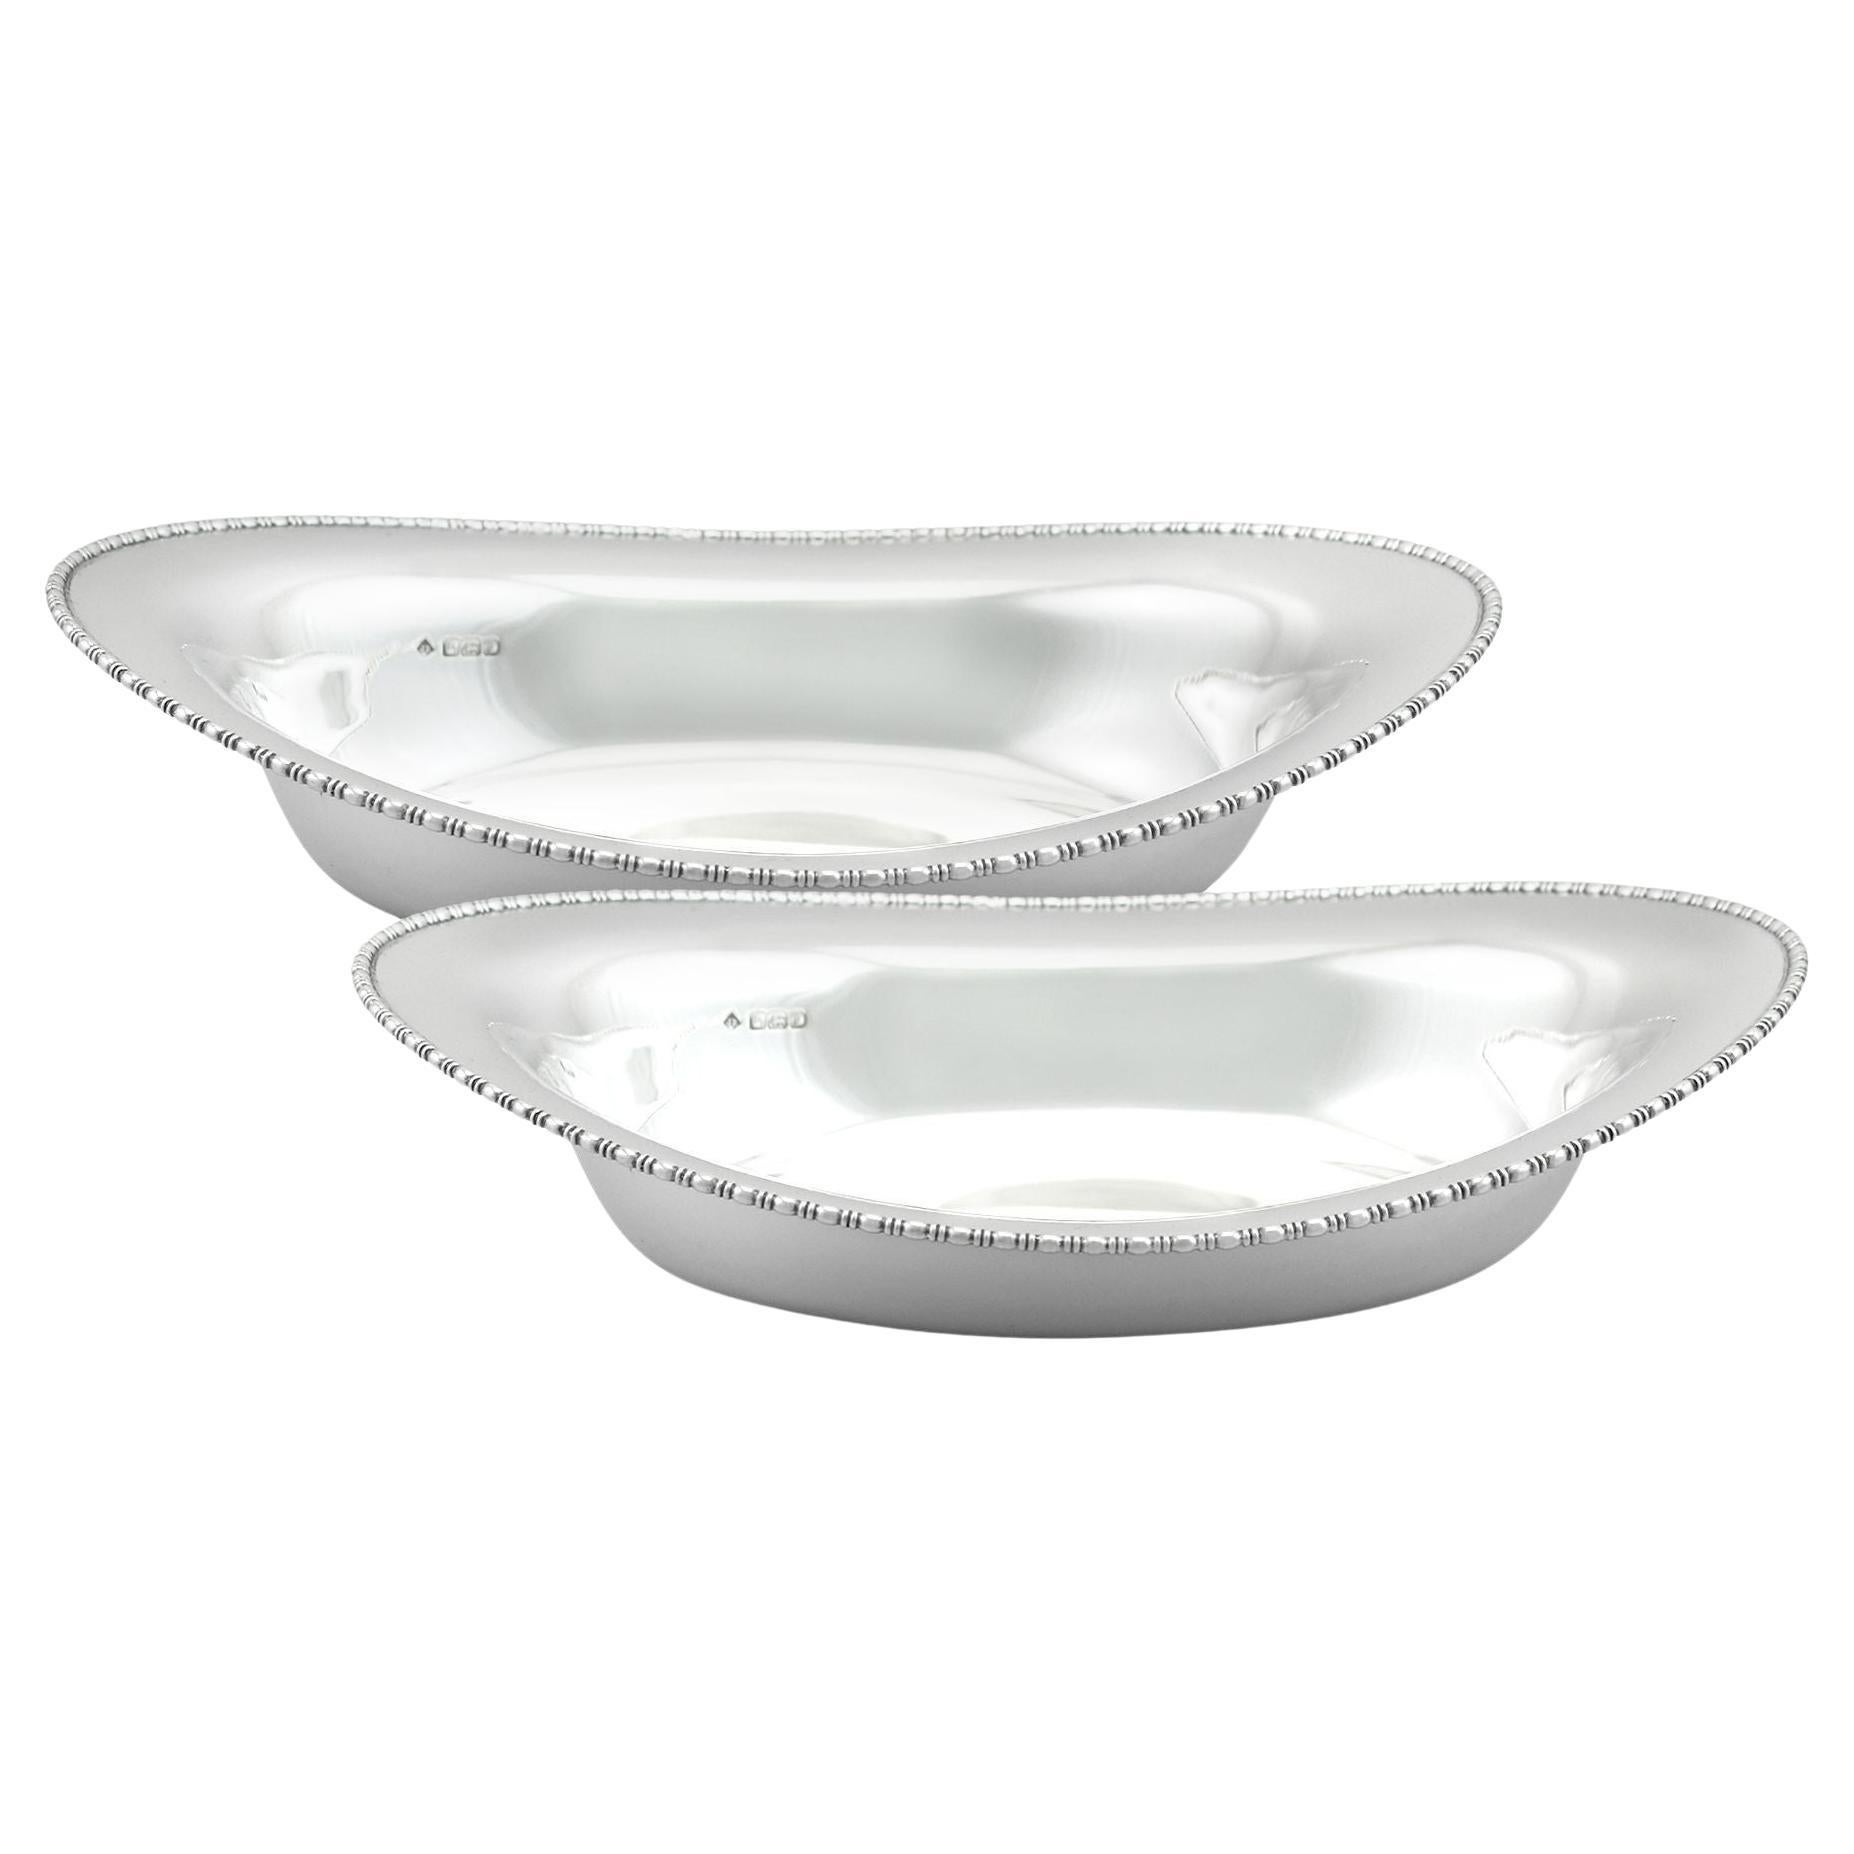 James Ramsay English Sterling Silver Bread Dishes For Sale